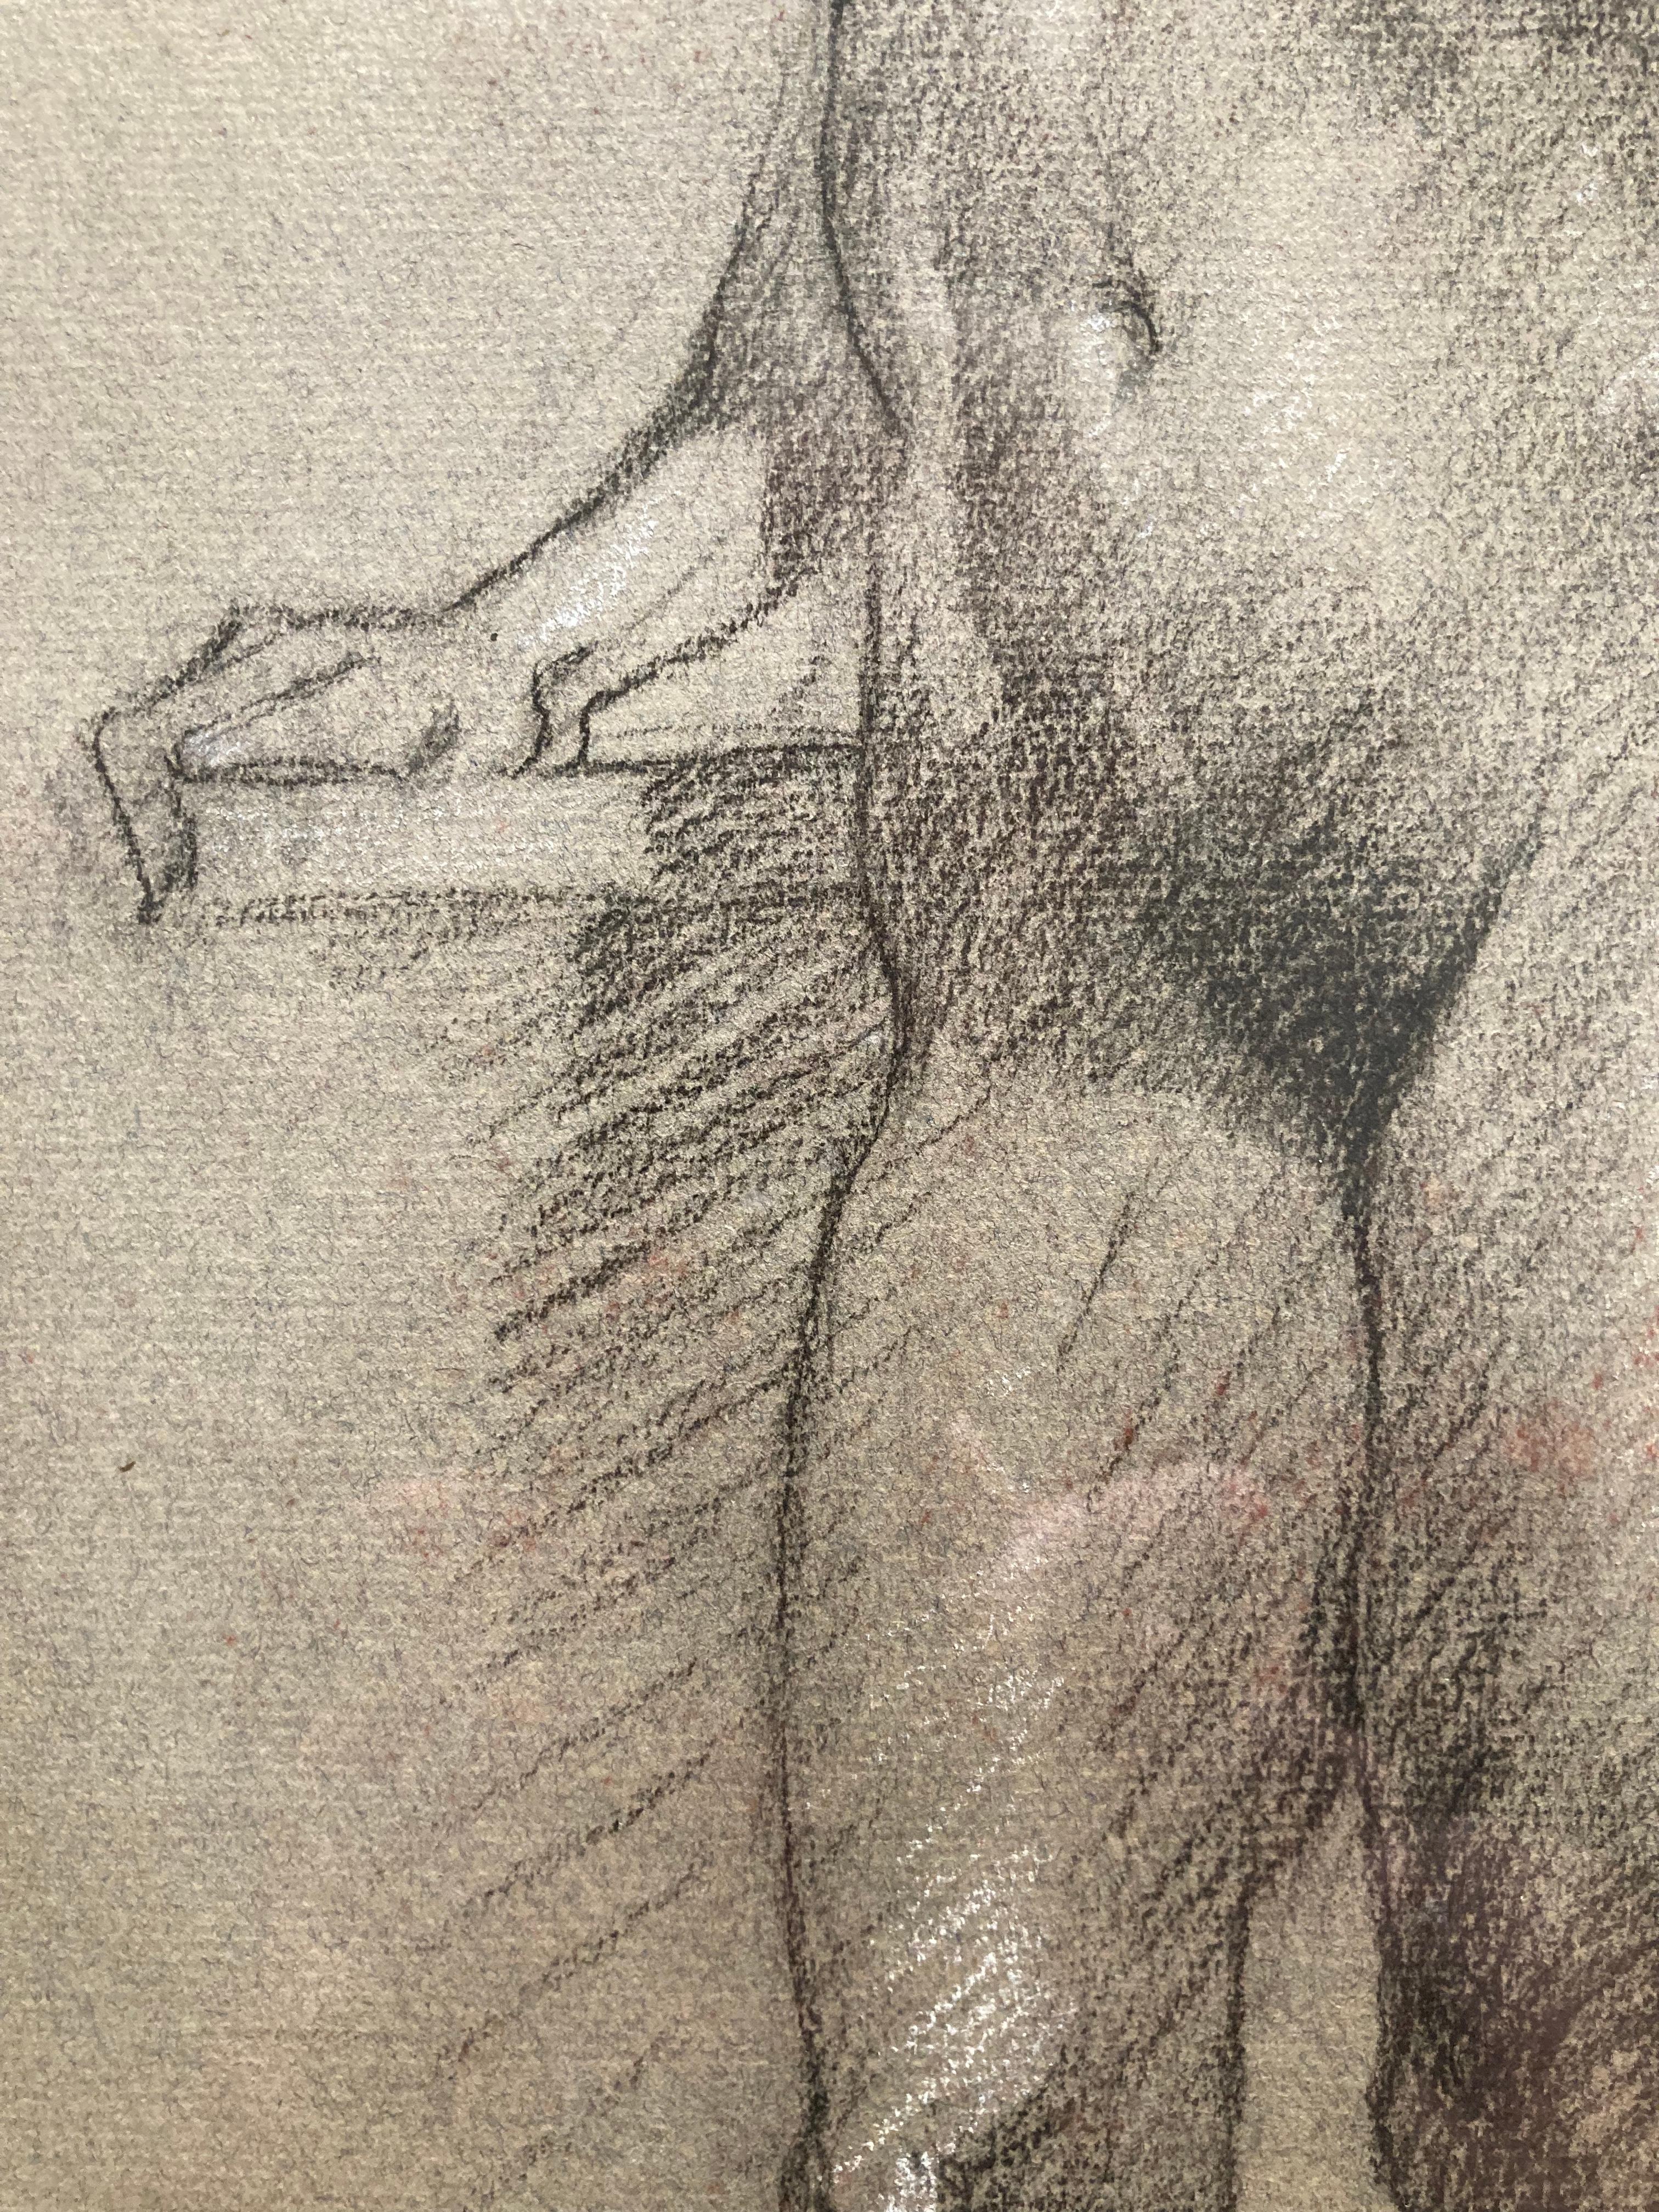 This Richard Vernon Goetz Drawing on Paper from the mid-20th Century features a standing female nude rendered in black and grey cross-hatch lines of Charcoal and Conté Crayon.
The weight of the very upright figure is on the left foot which is